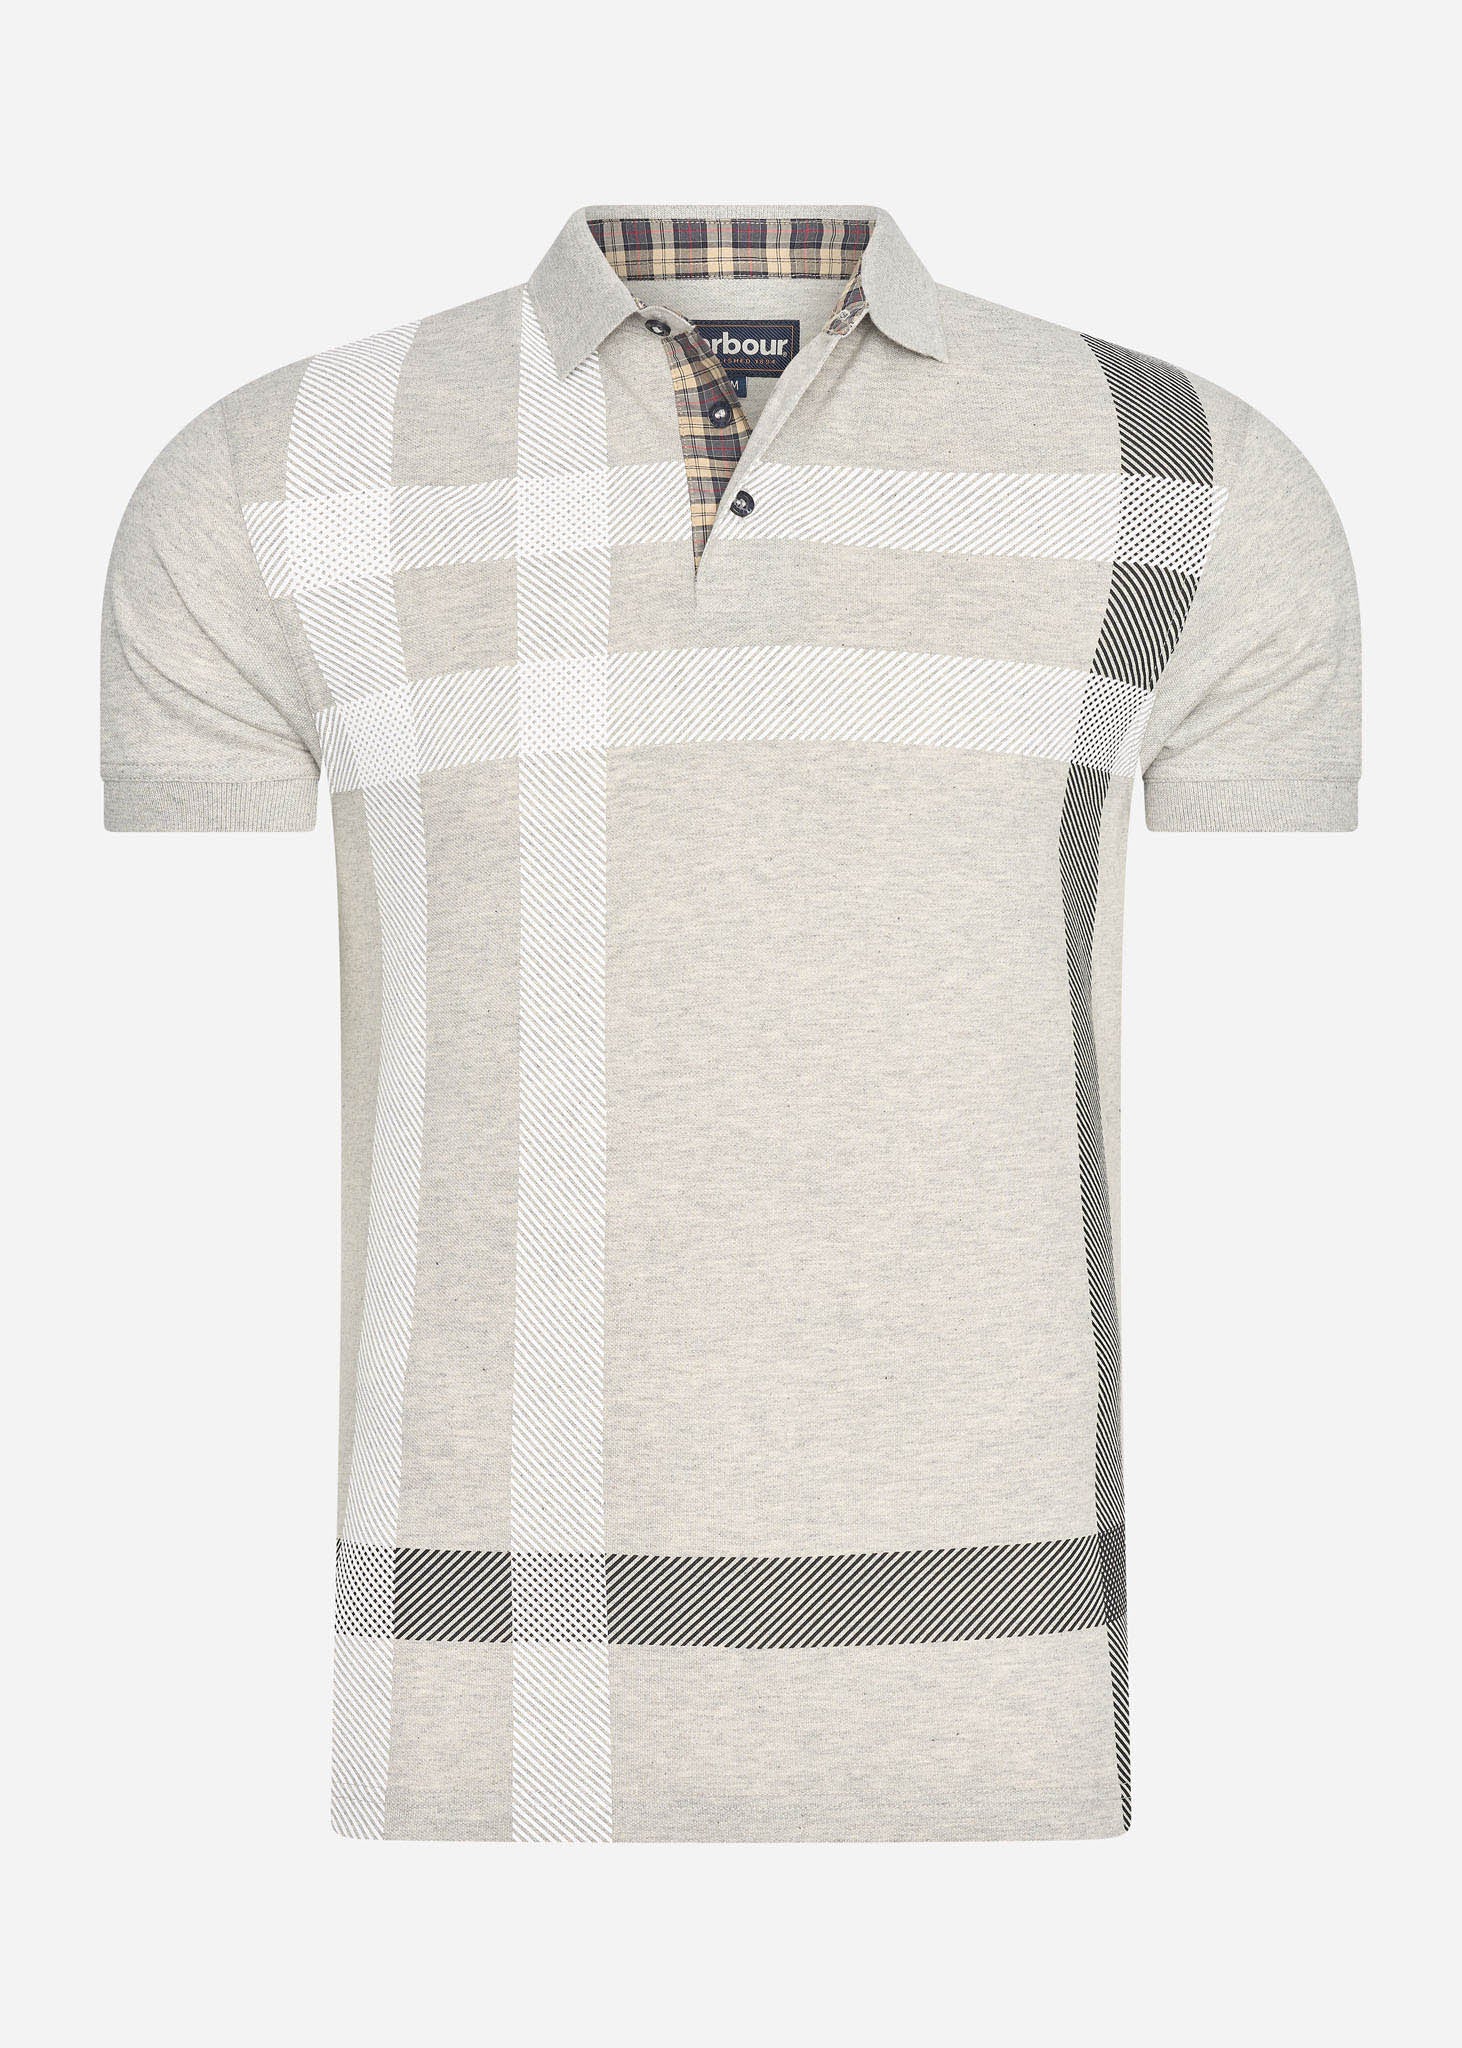 barbour polo grey marl